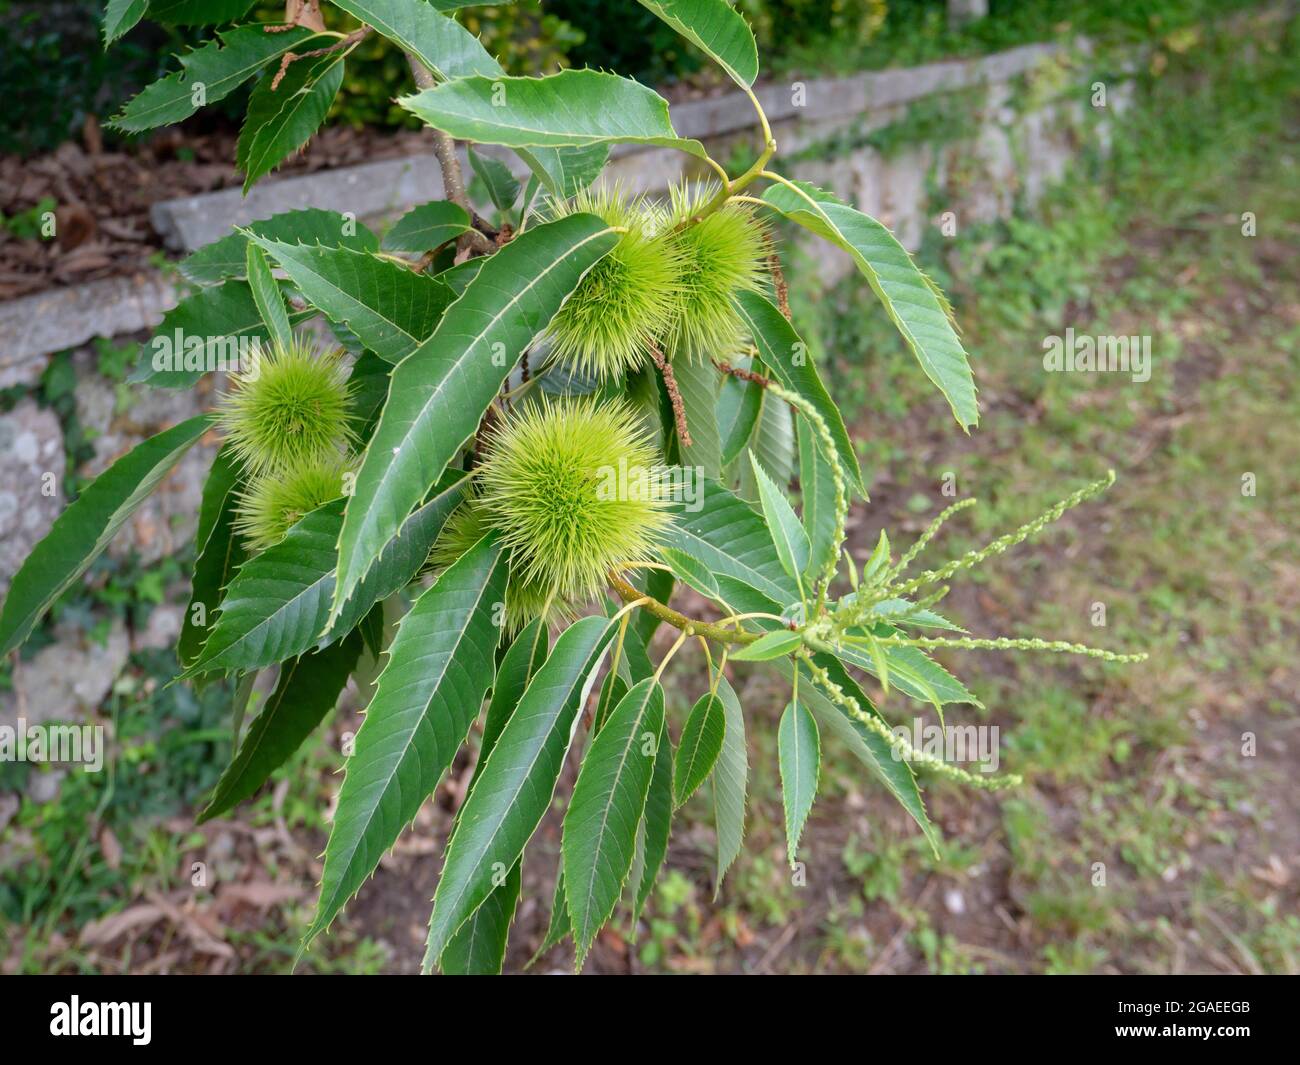 Castanea sativa the sweet or Spanish chestnut tree branch with leaves and spiny cupules Stock Photo